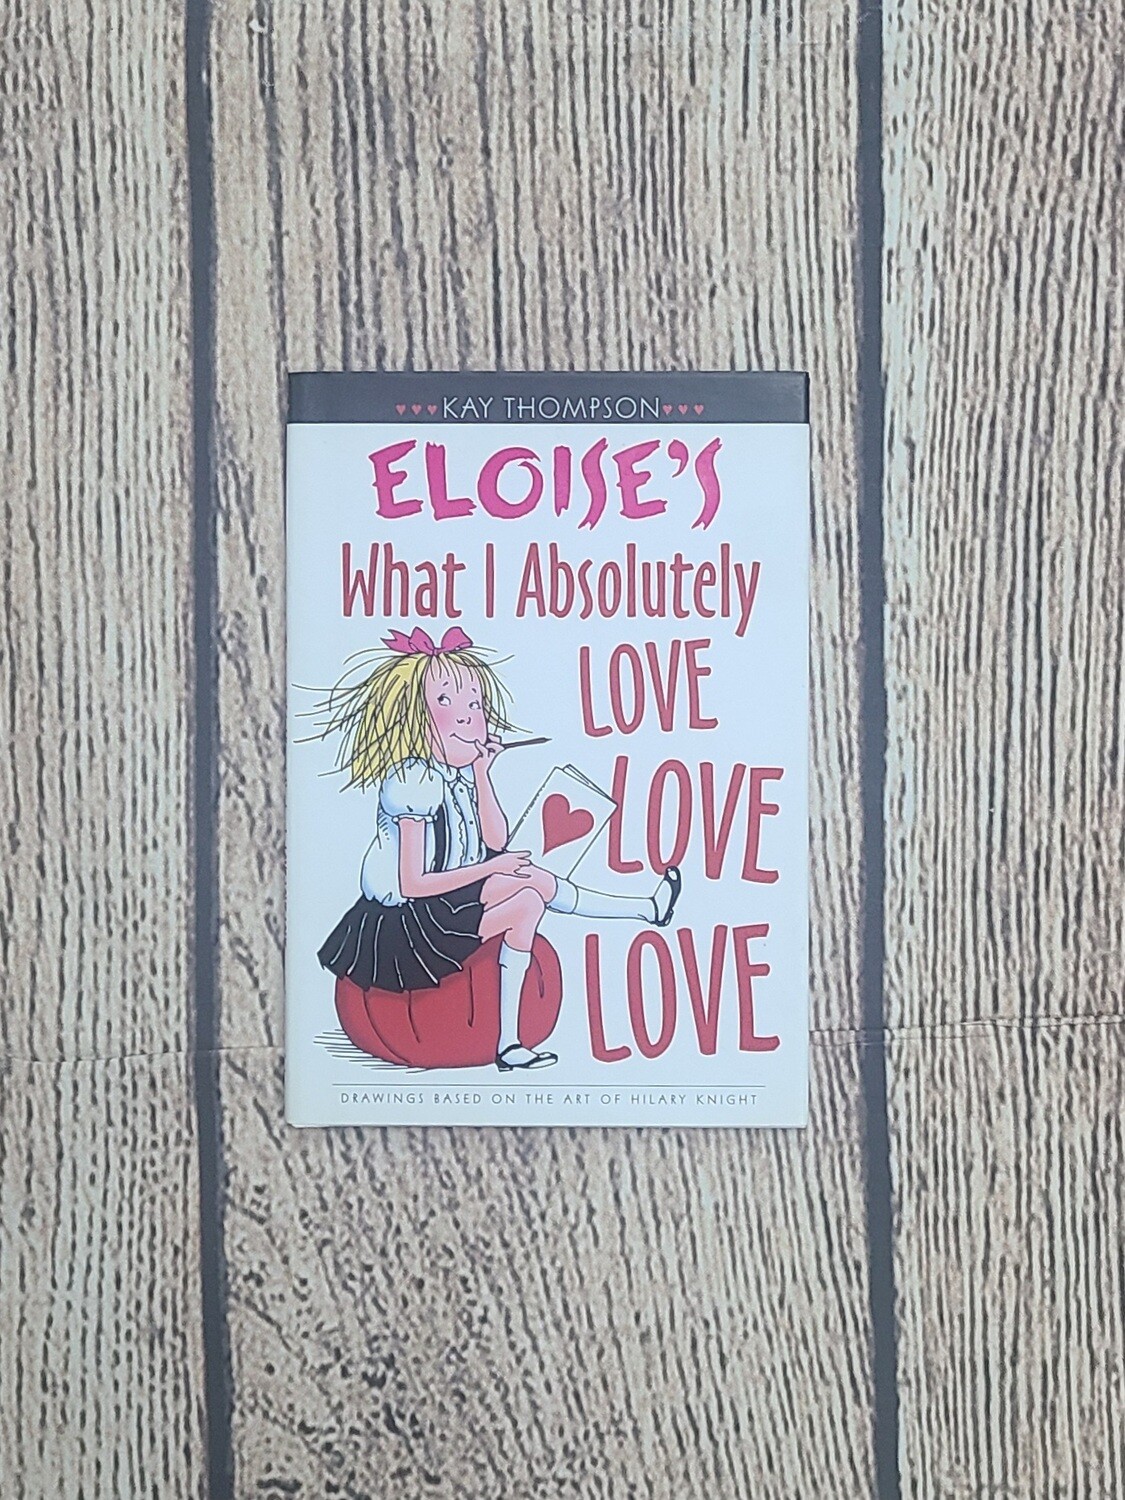 Eloise's What I Absolutely Love Love Love by Kay Thompson - Hardback - Great Condition